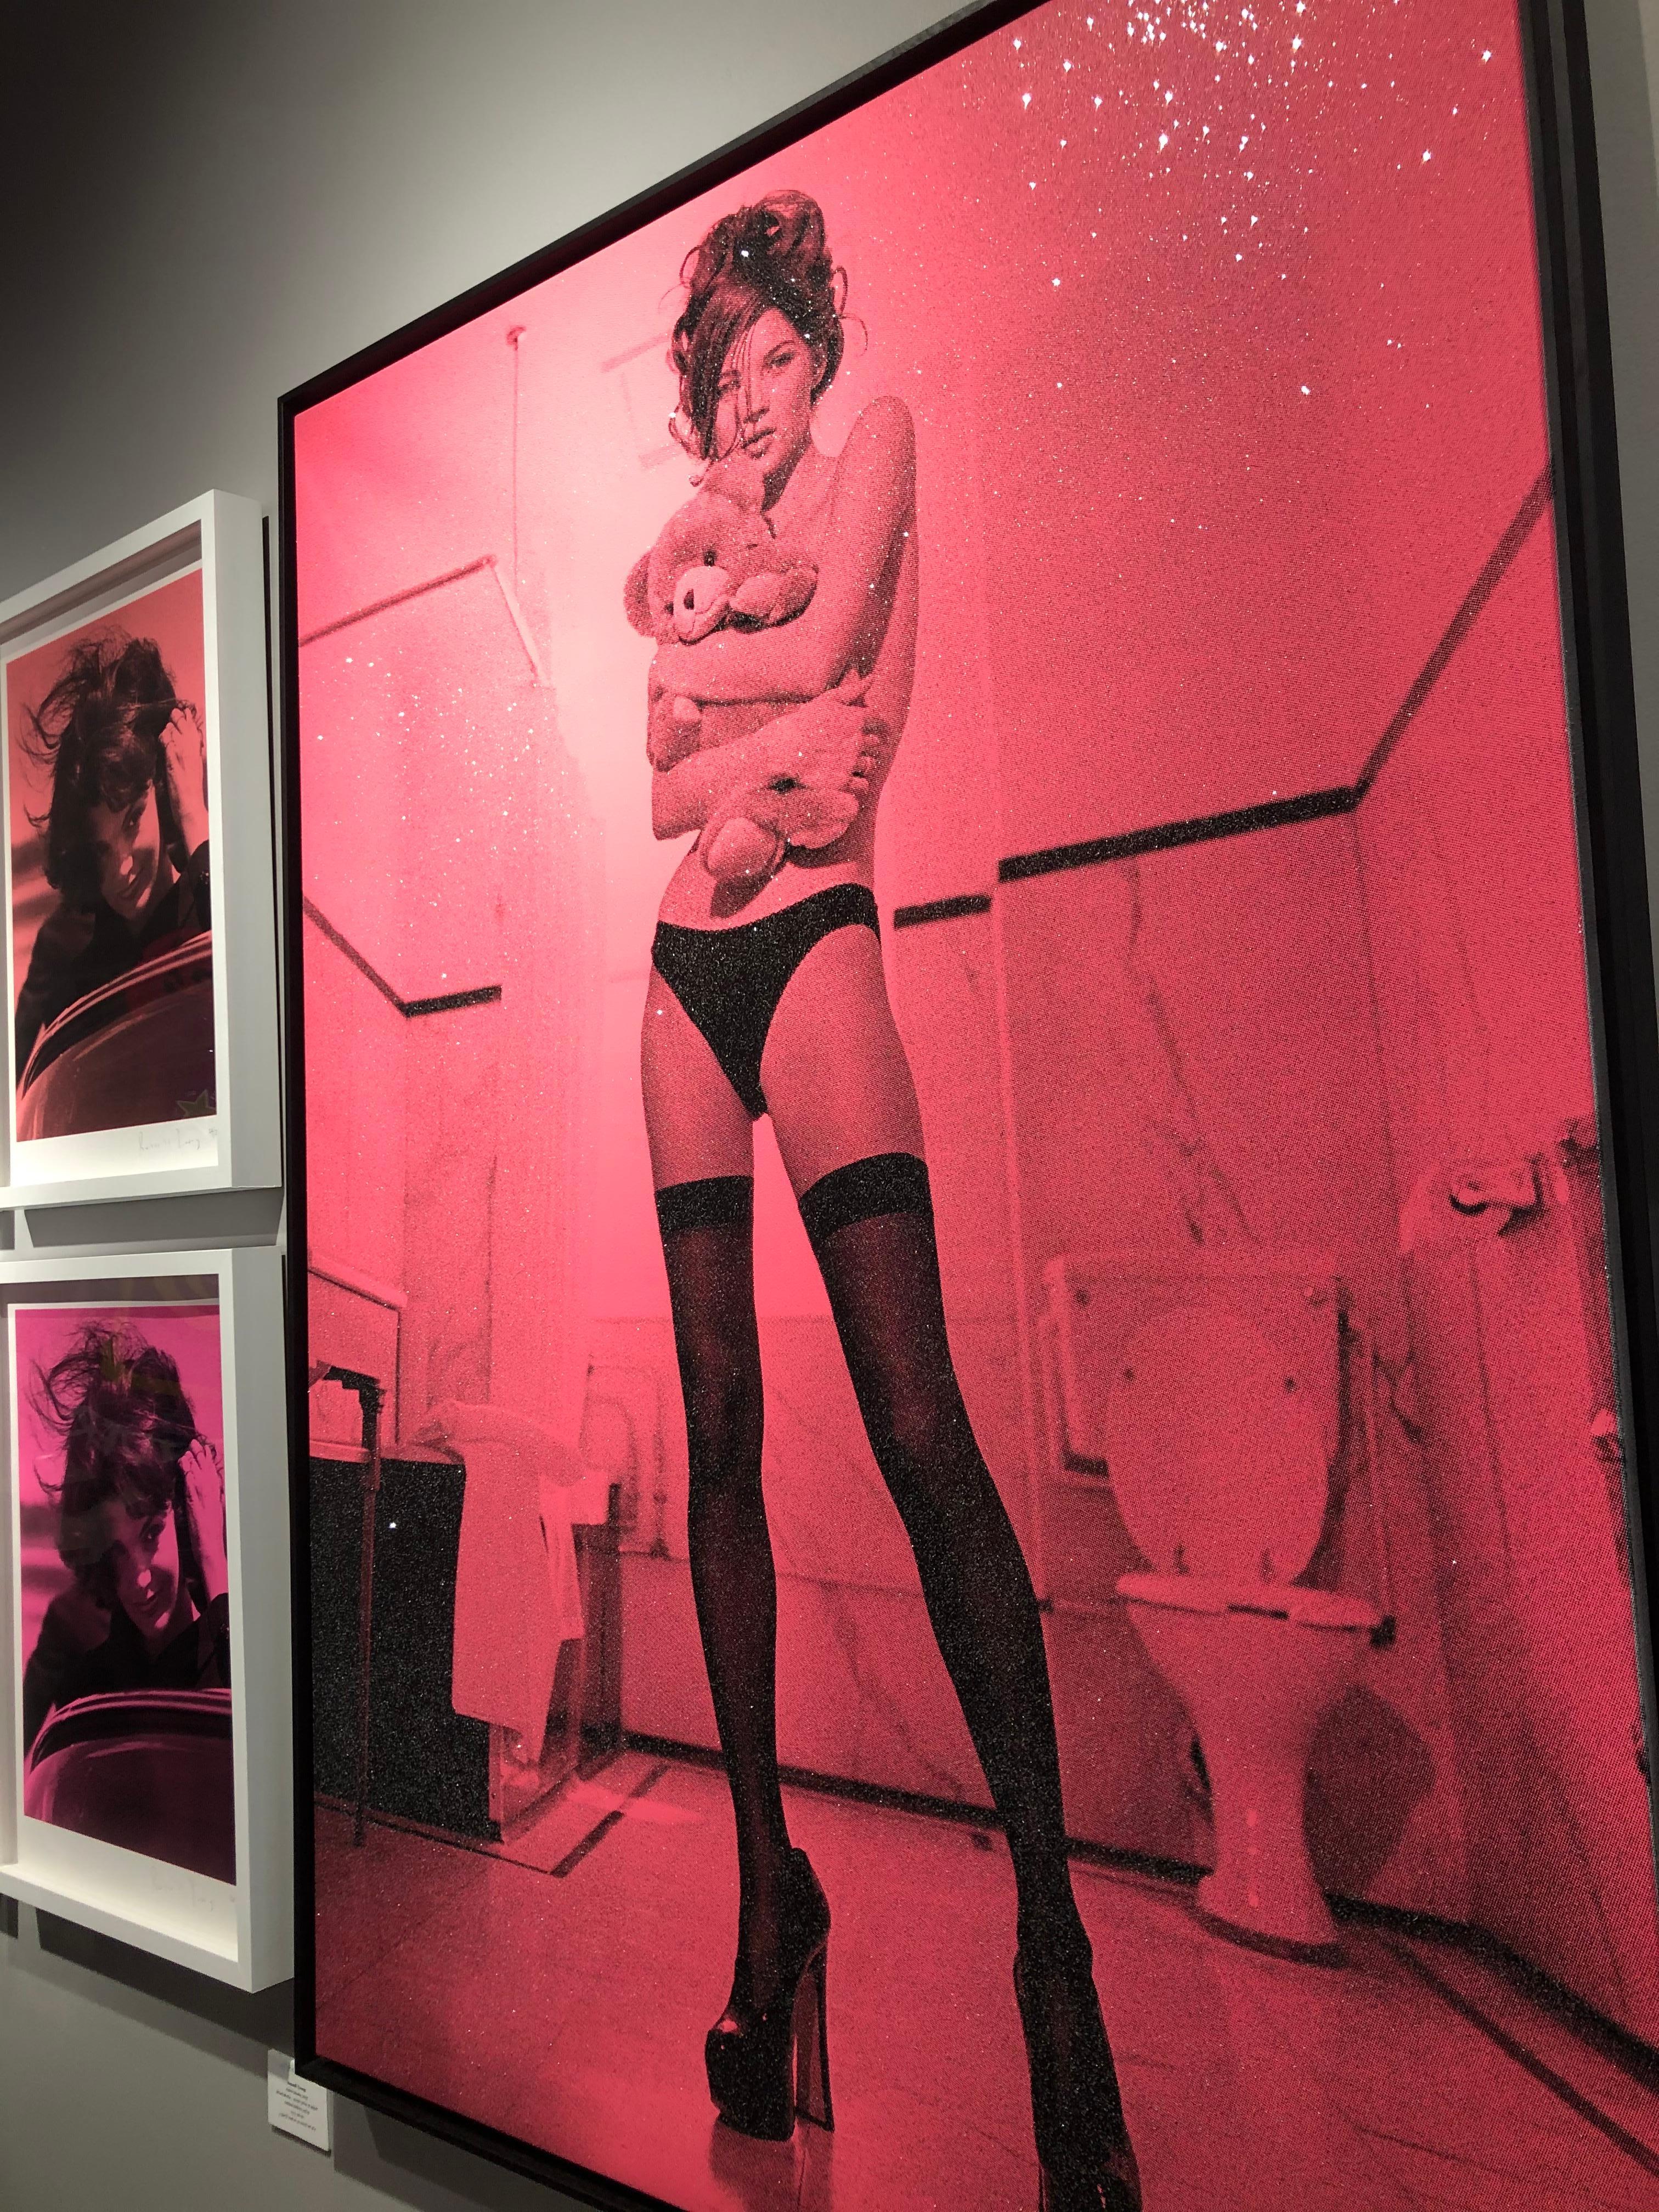 UNIQUE ARTWORK - pink 
Enamel and Diamond dust screen print on linen
Kate Moss series is probably one of the famous works that Russell has created .
His pieces have graced the auction block at Sotheby’s, Christie’s, and Phillips in both the United